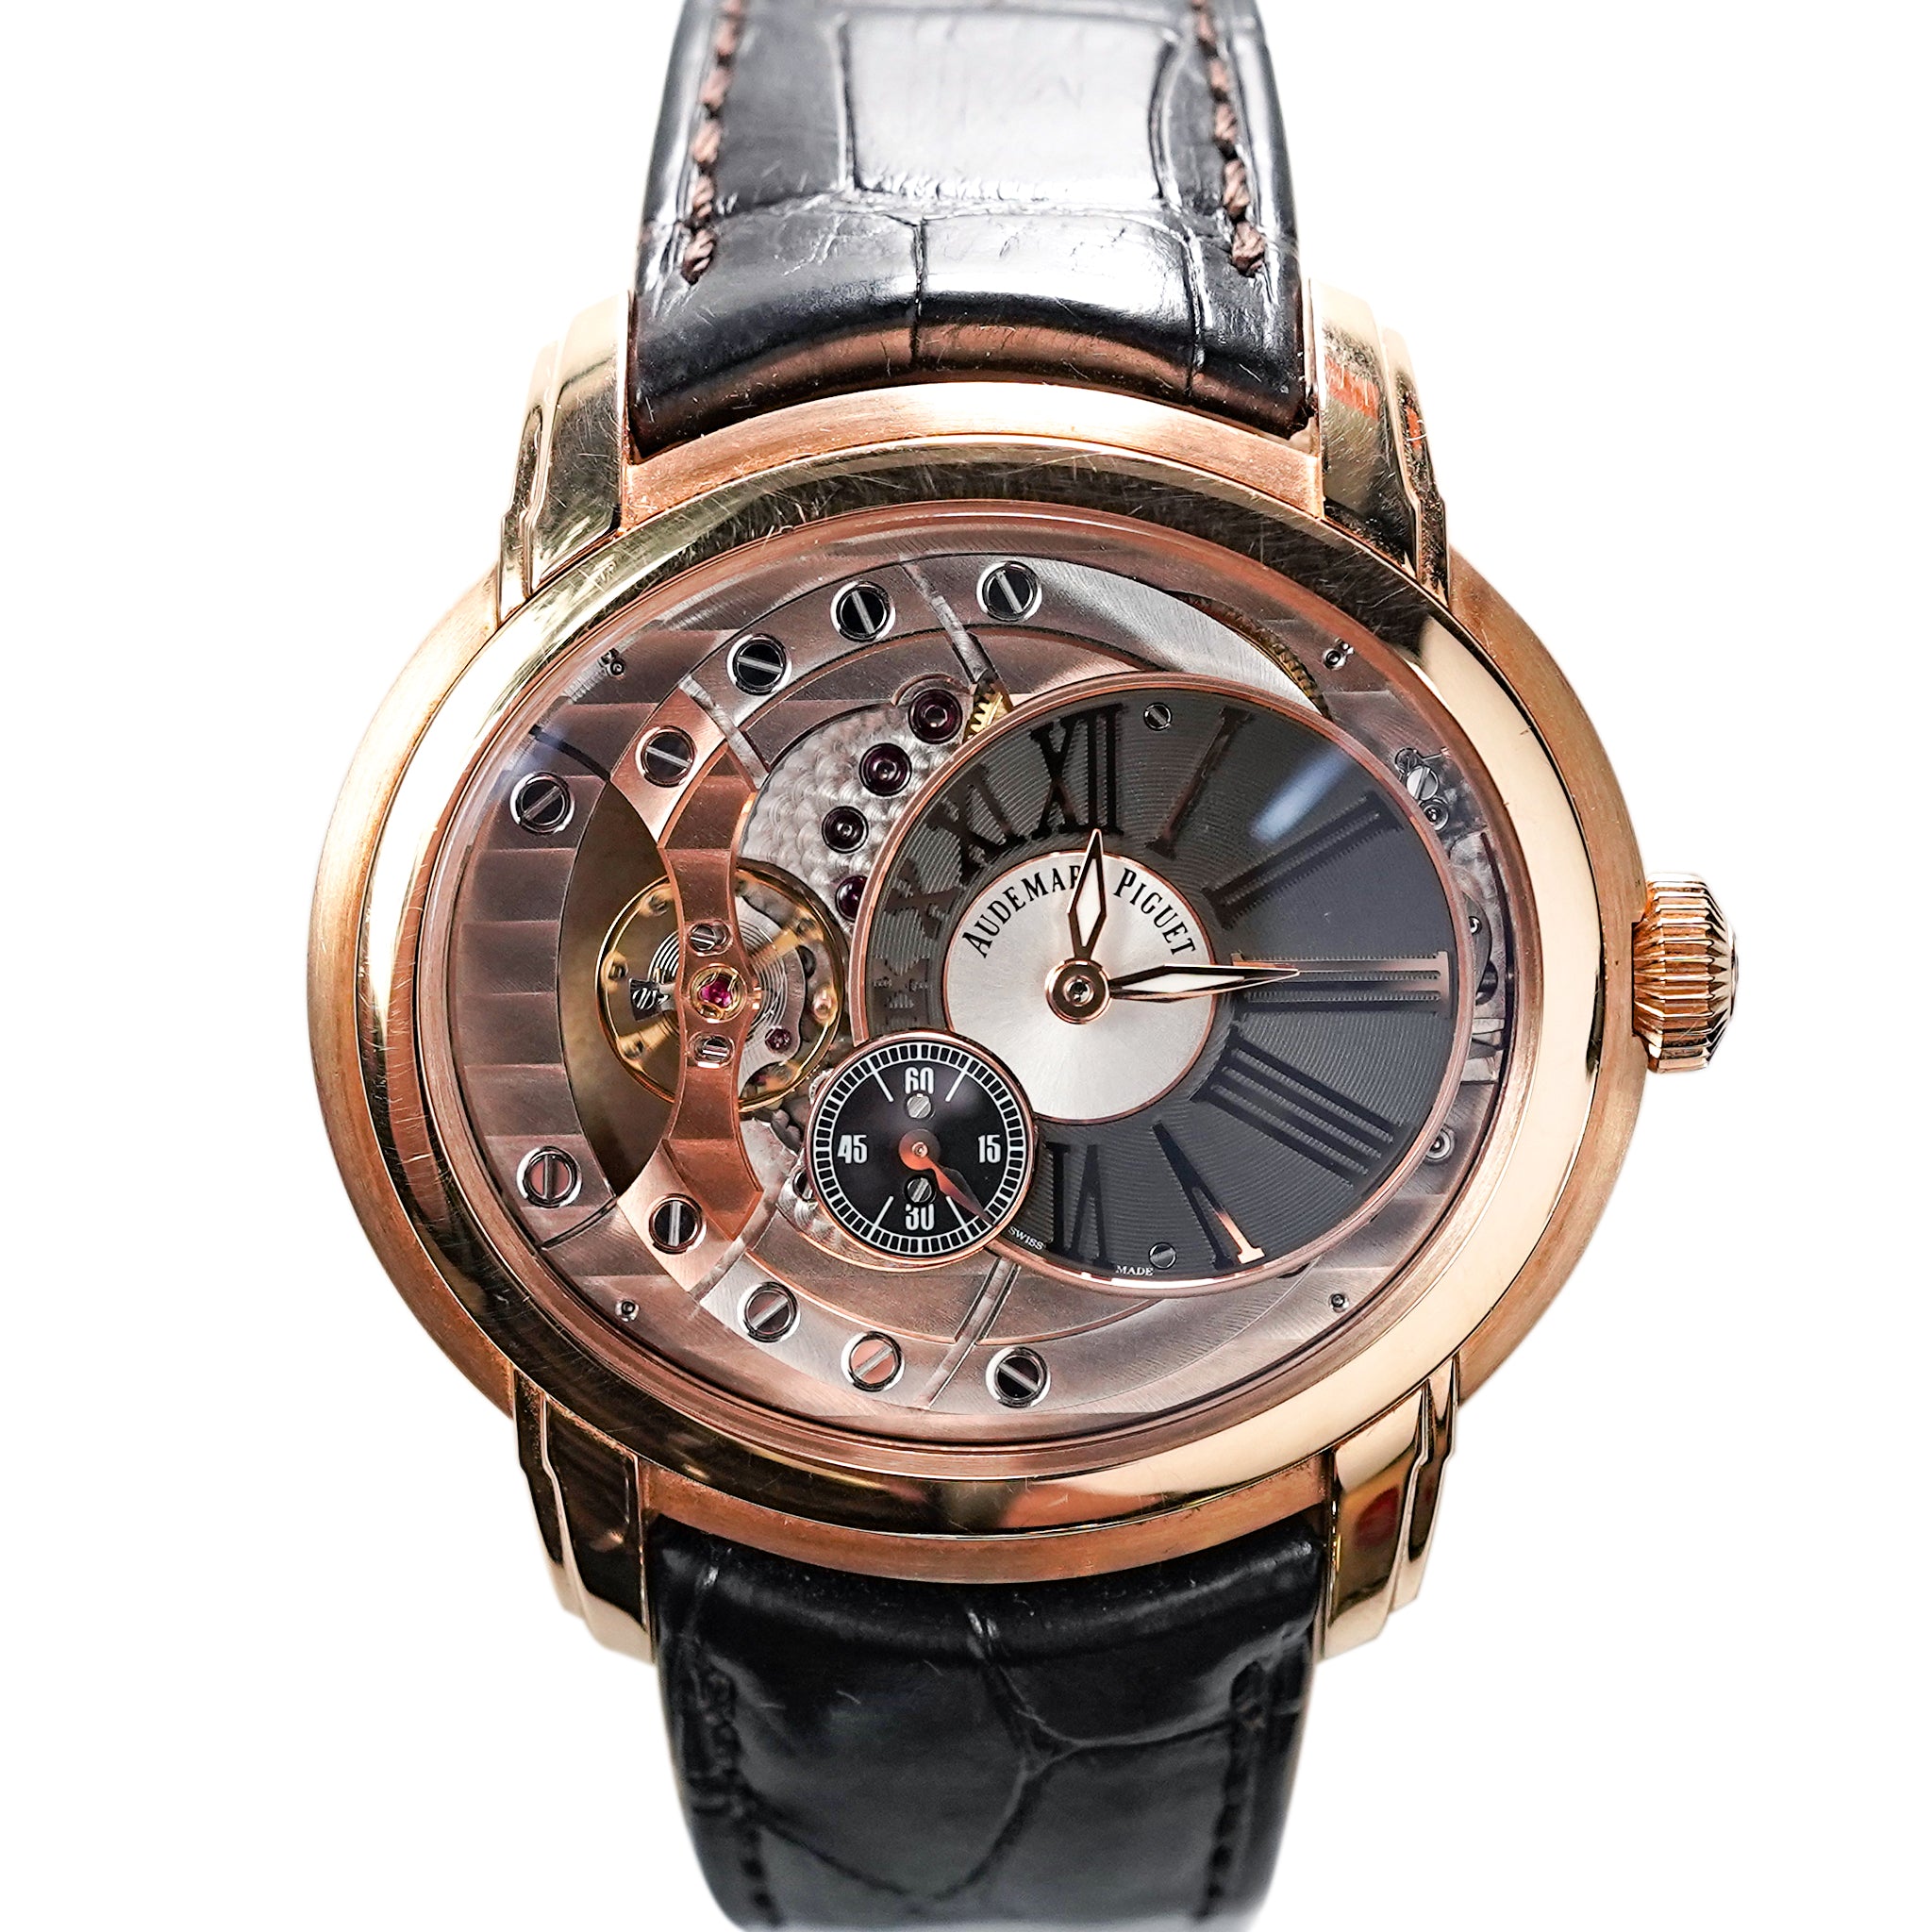 Audemars Piguet Millenary Automatic 4101, Anthracite & Silvered Dial ROSE GOLD 15350OR.OO.D093CR.01